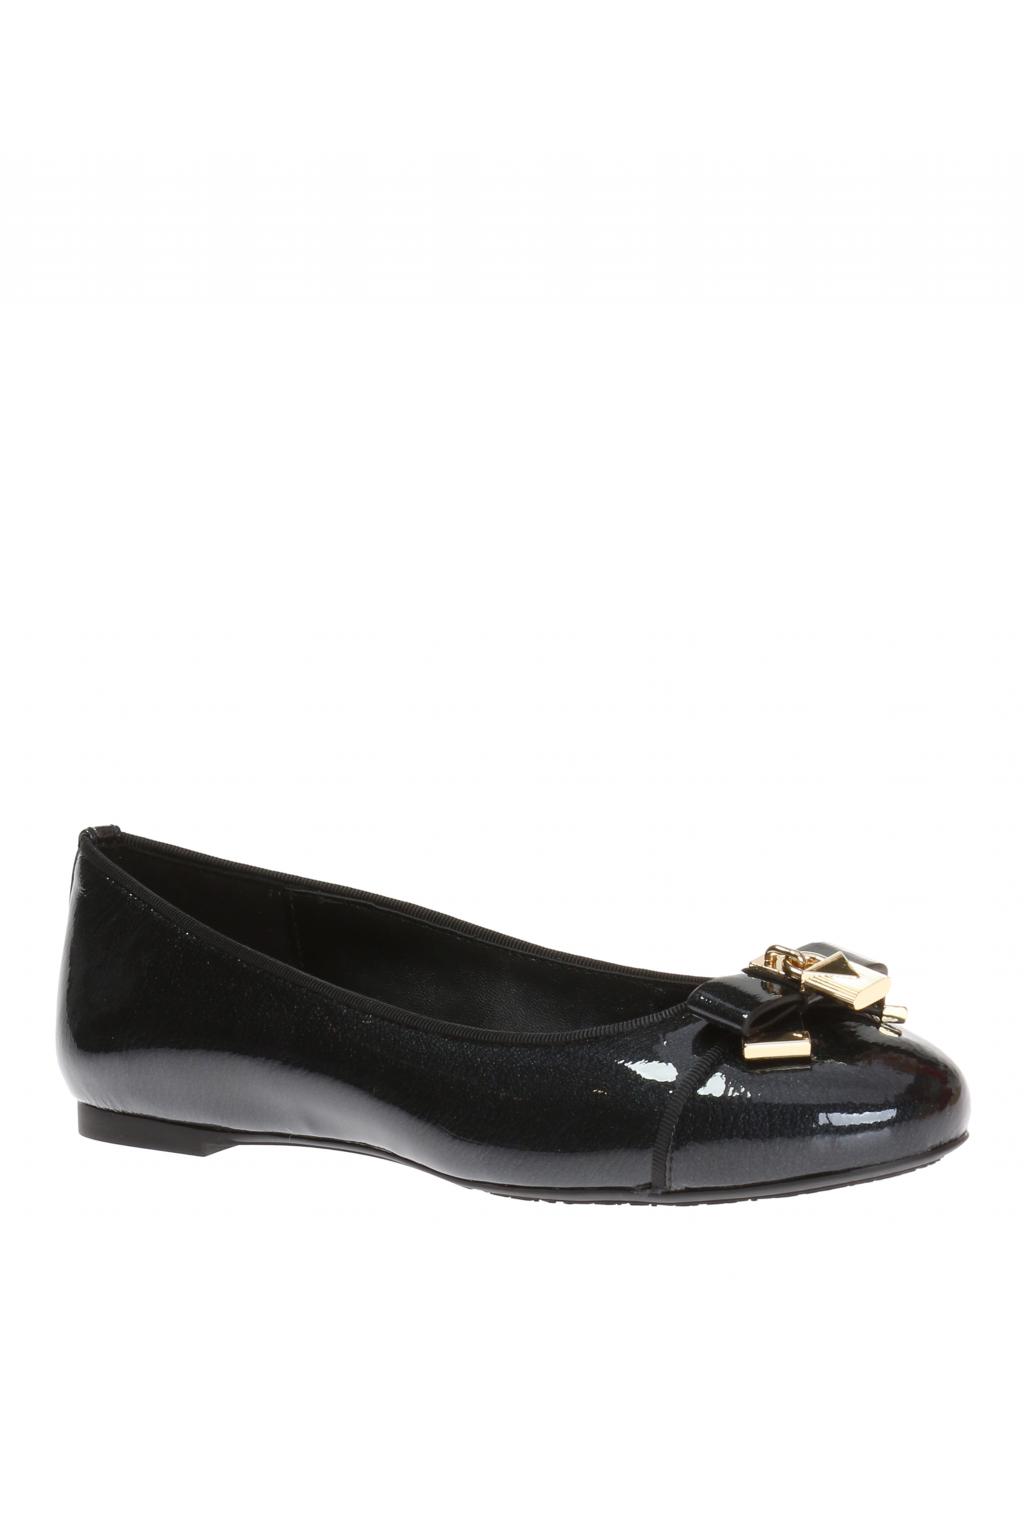 Michael Michael Kors 'Alice' ballet flats with bow | Women's Shoes 